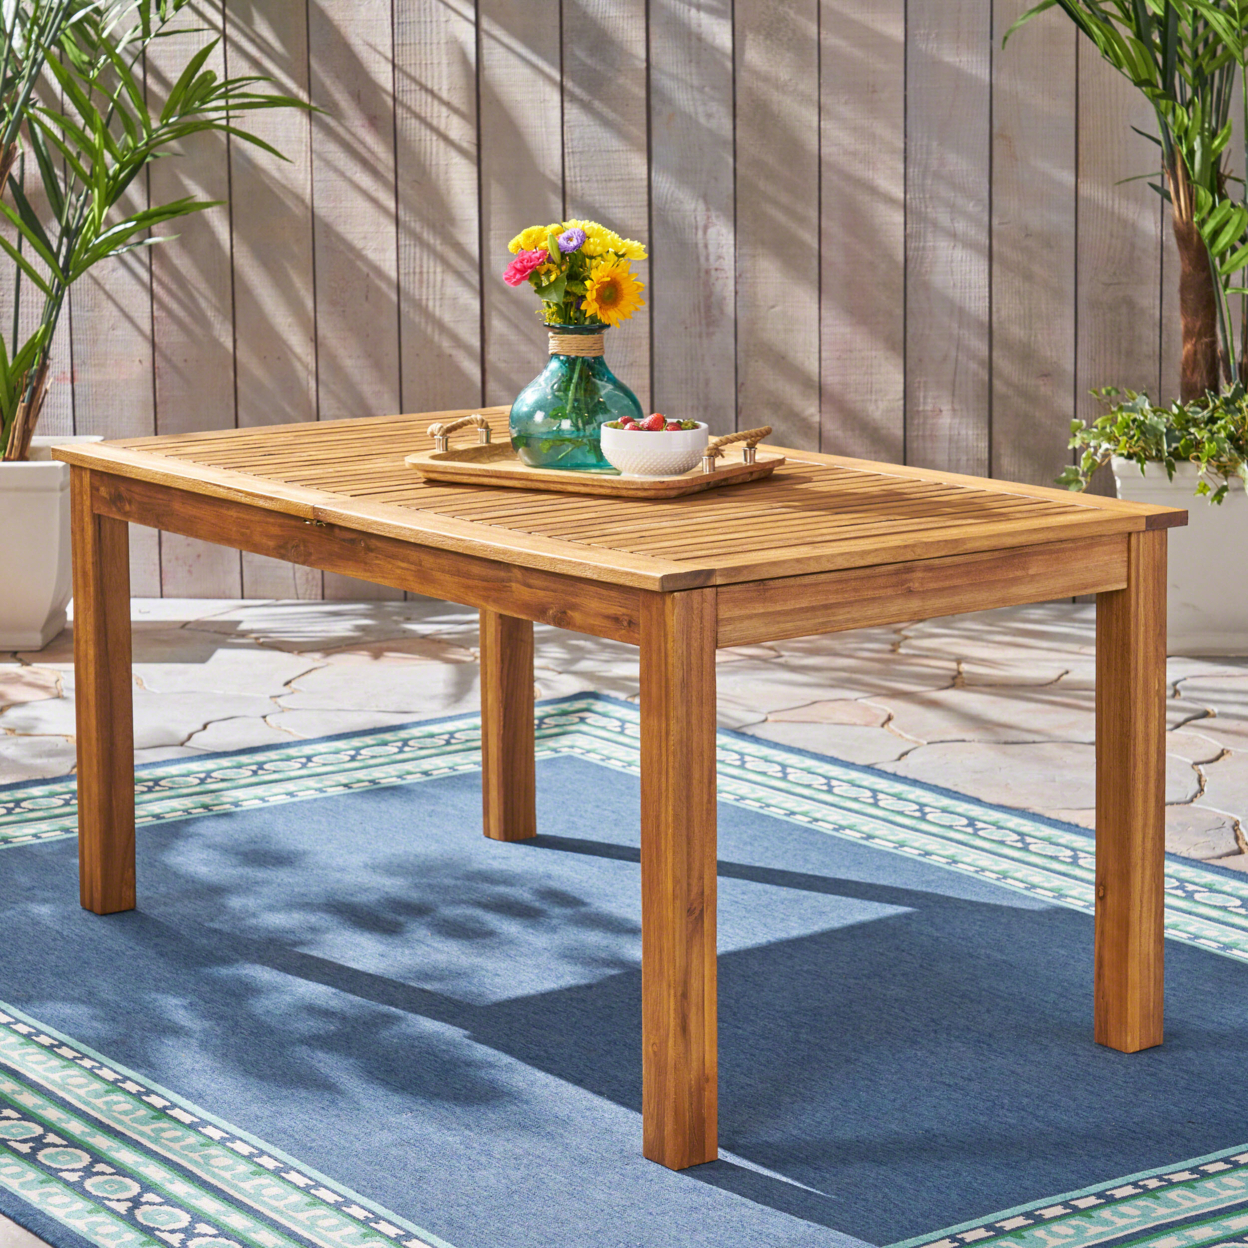 Eric Outdoor Expandable Acacia Wood Dining Table - Natural Finish